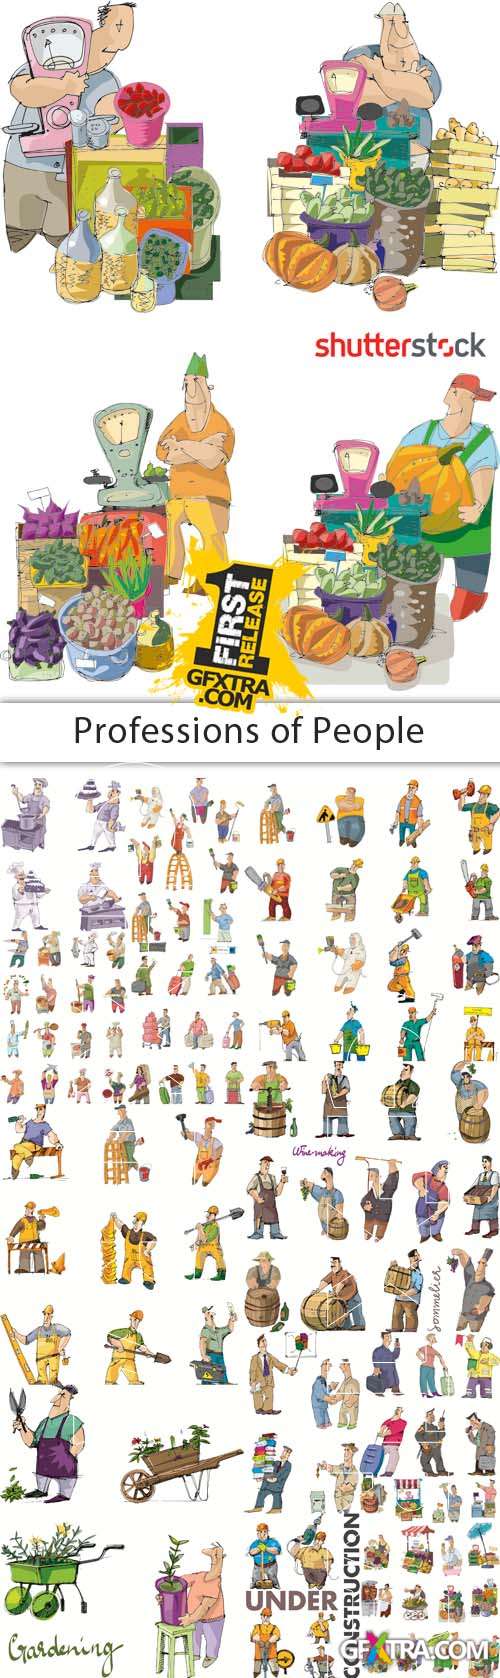 Professions of People - 25 EPS Vector Stock